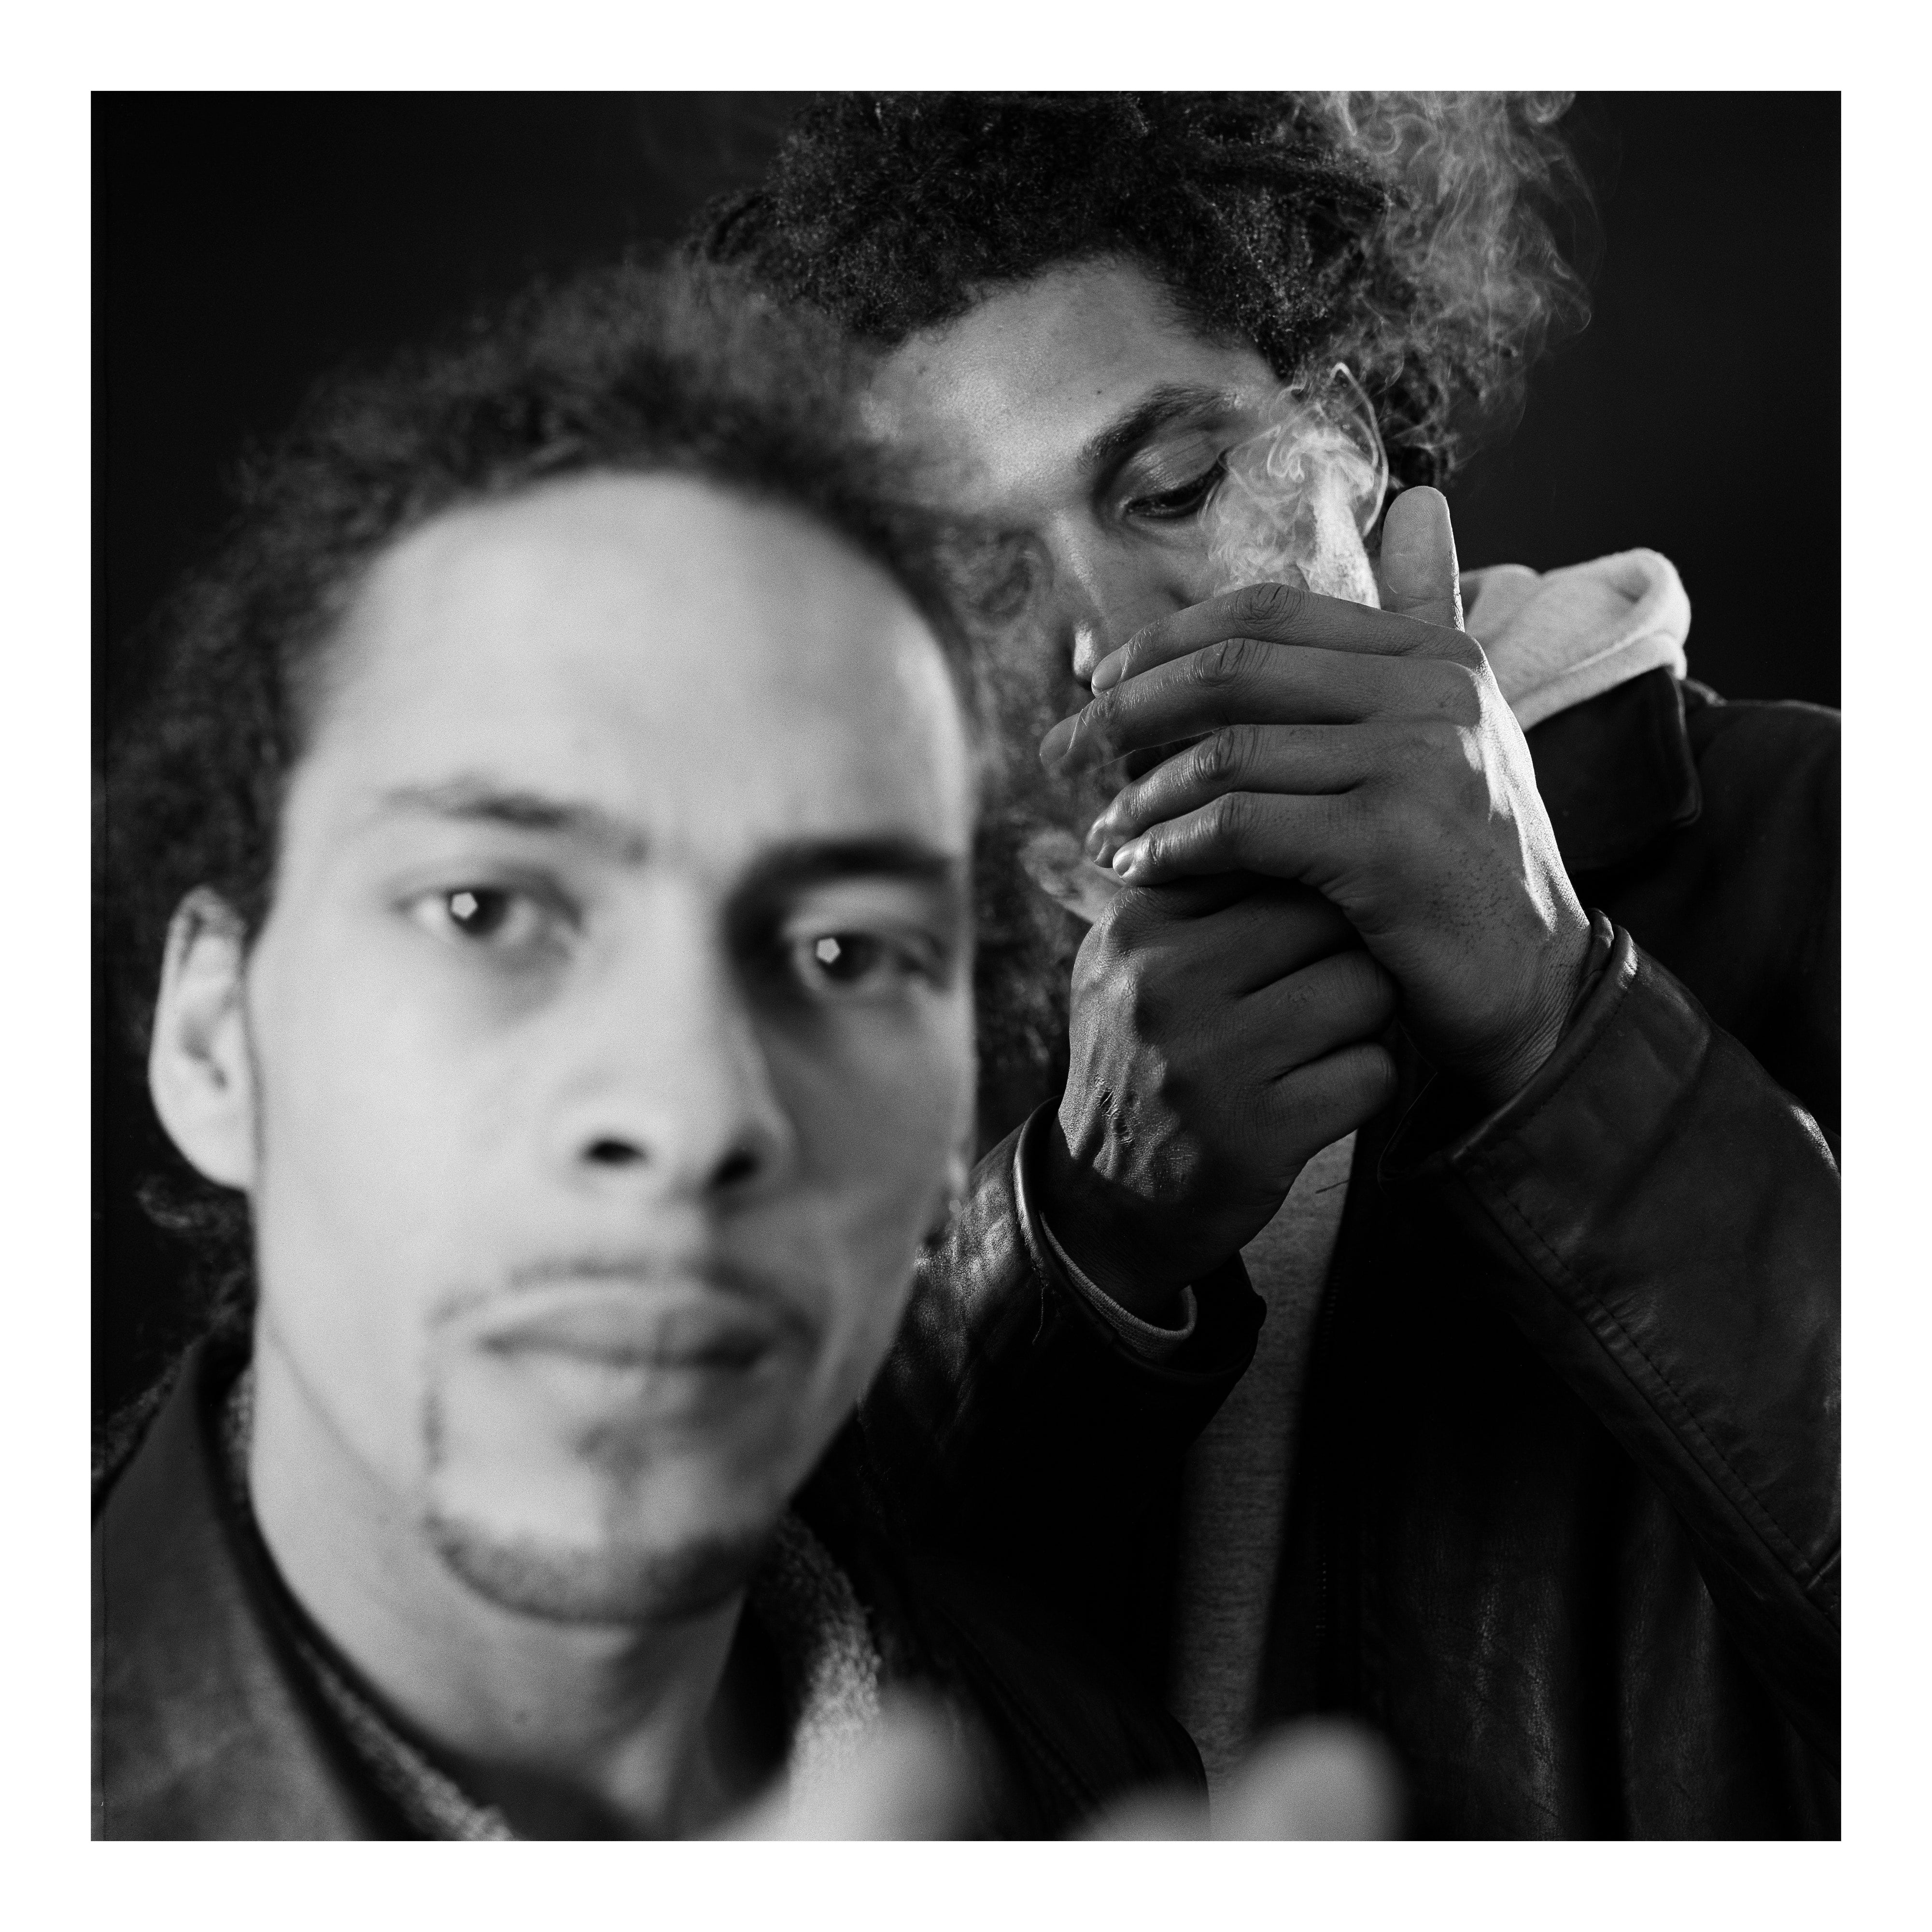 Roni Size and Krust, Bristol drum’n’bass duo photographed for ‘Straight No Chaser’ magazine in 1996. As Reprazent, they would go on to win the 1997 Mercury Prize for their album ‘New Forms’